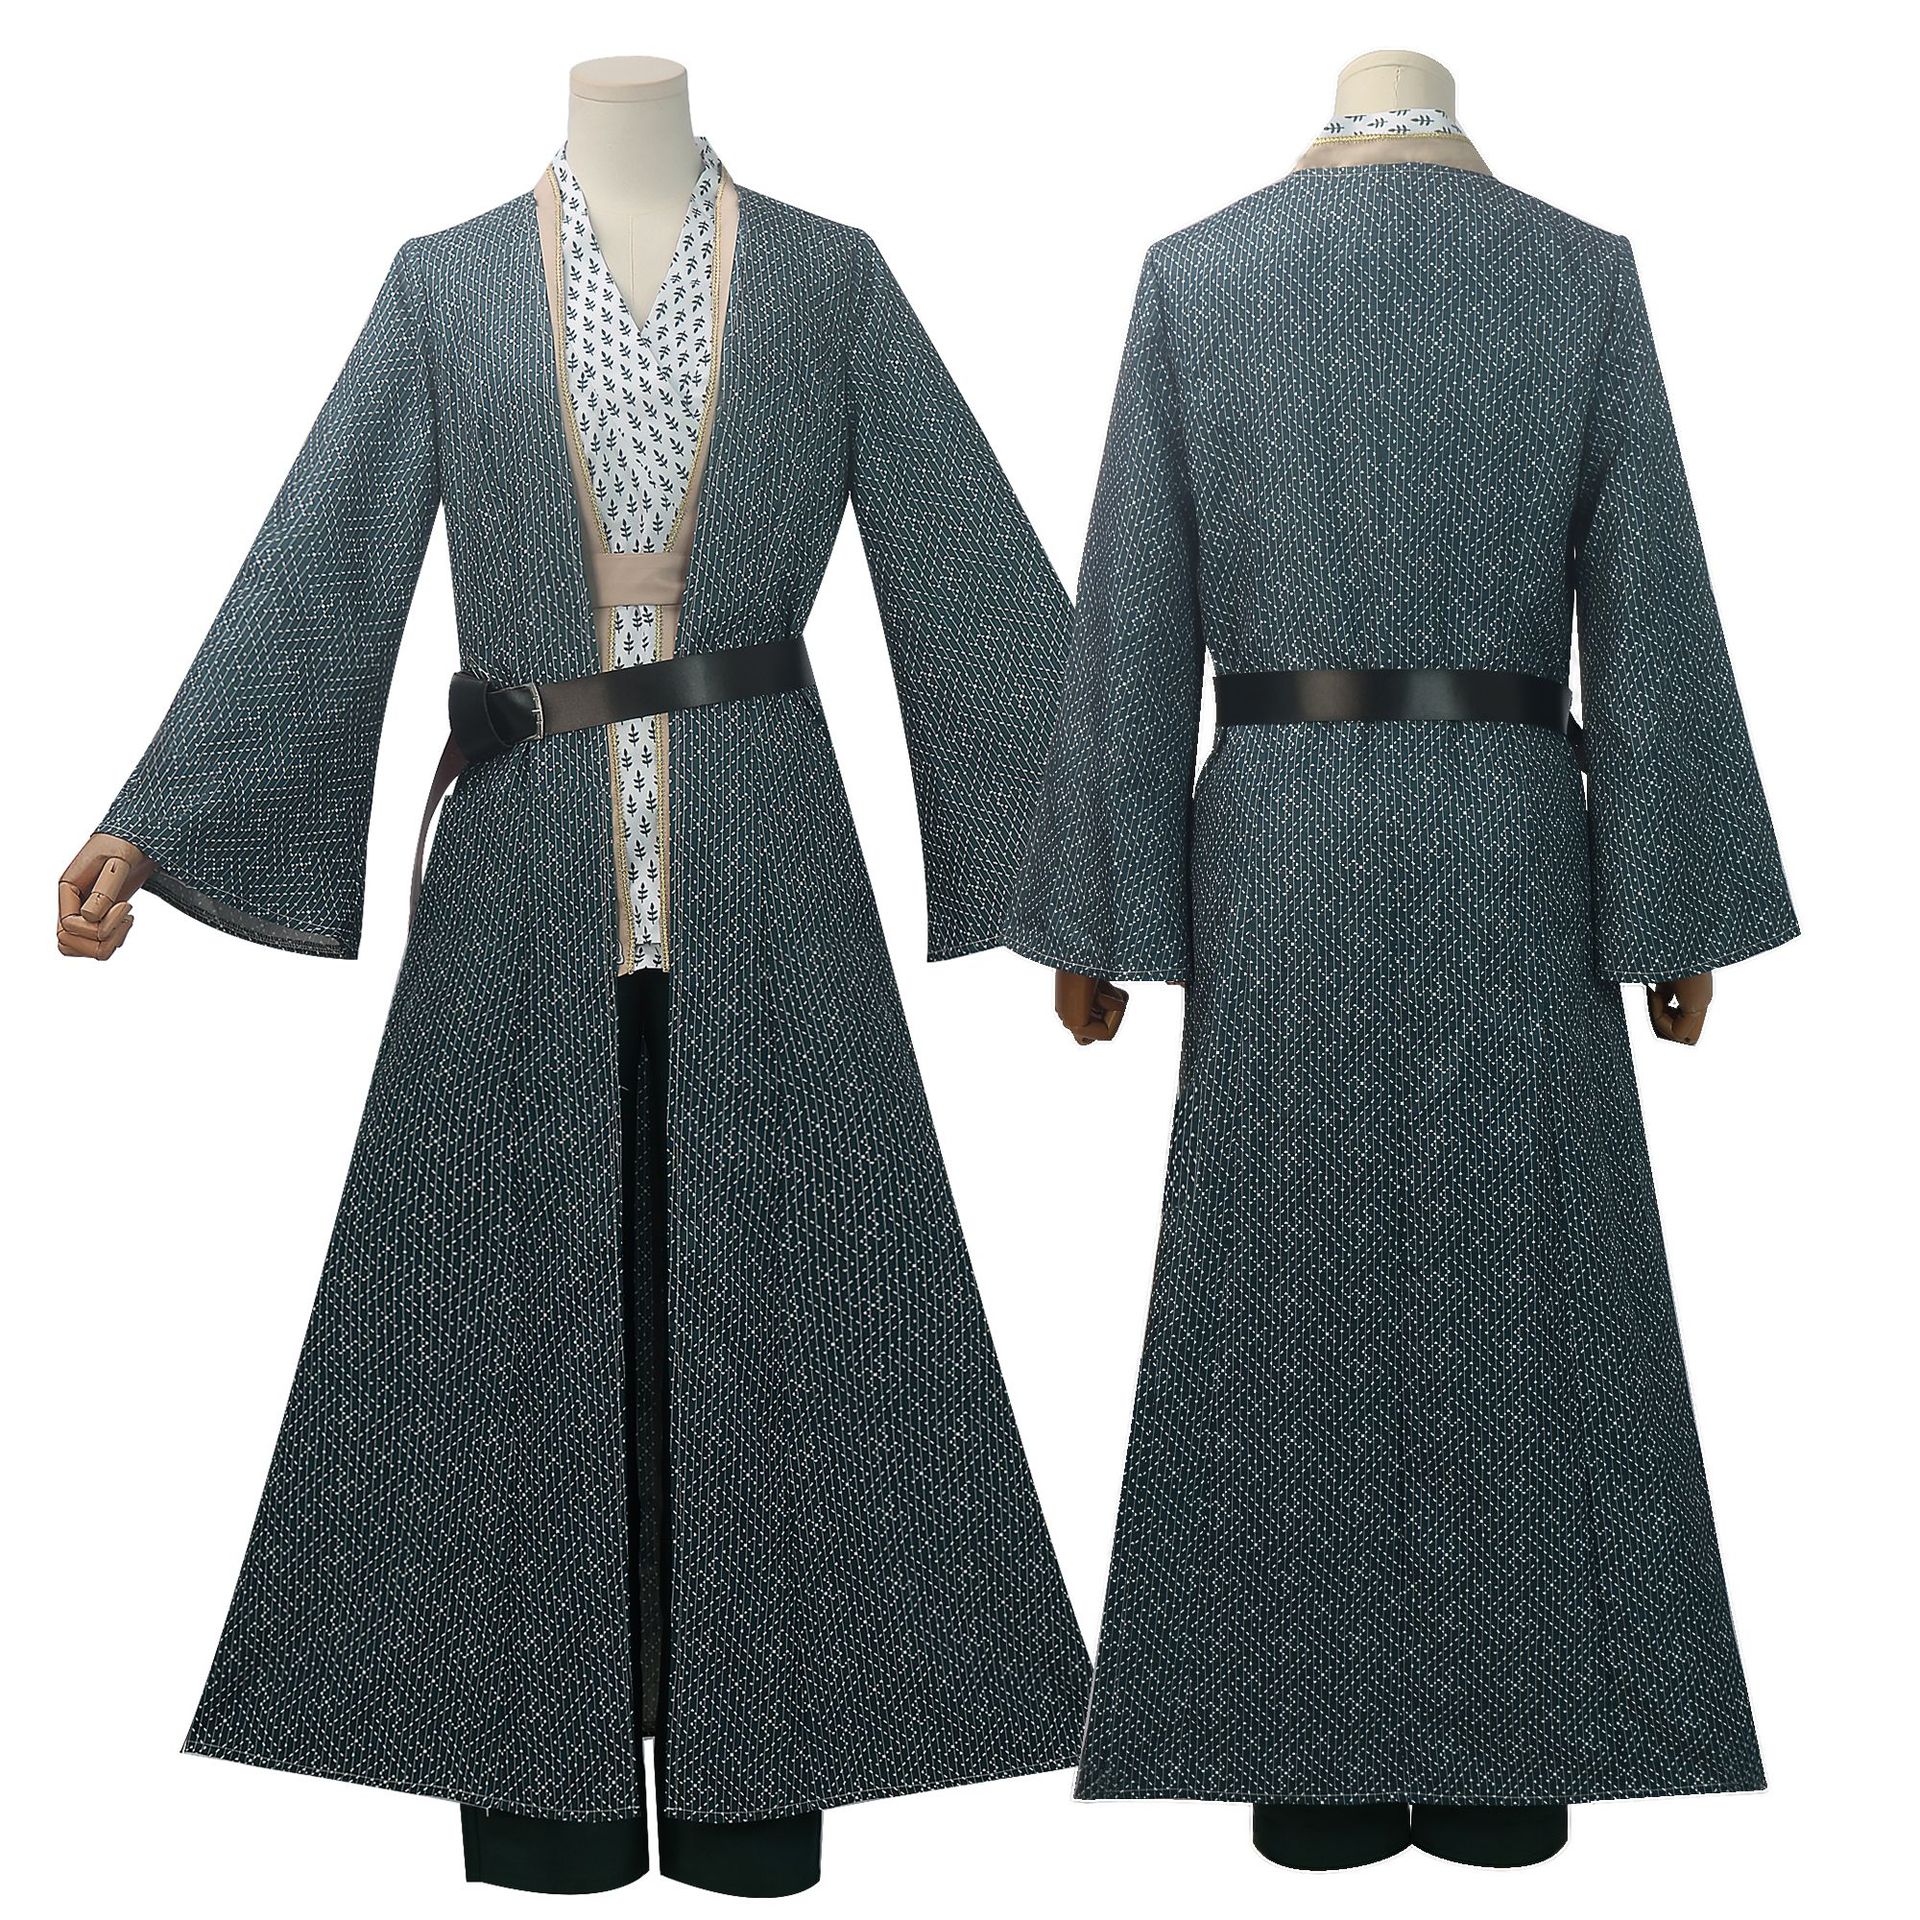 The Witcher: Blood Origin cosplay costume The Witcher: Blood Origin cosplay costume